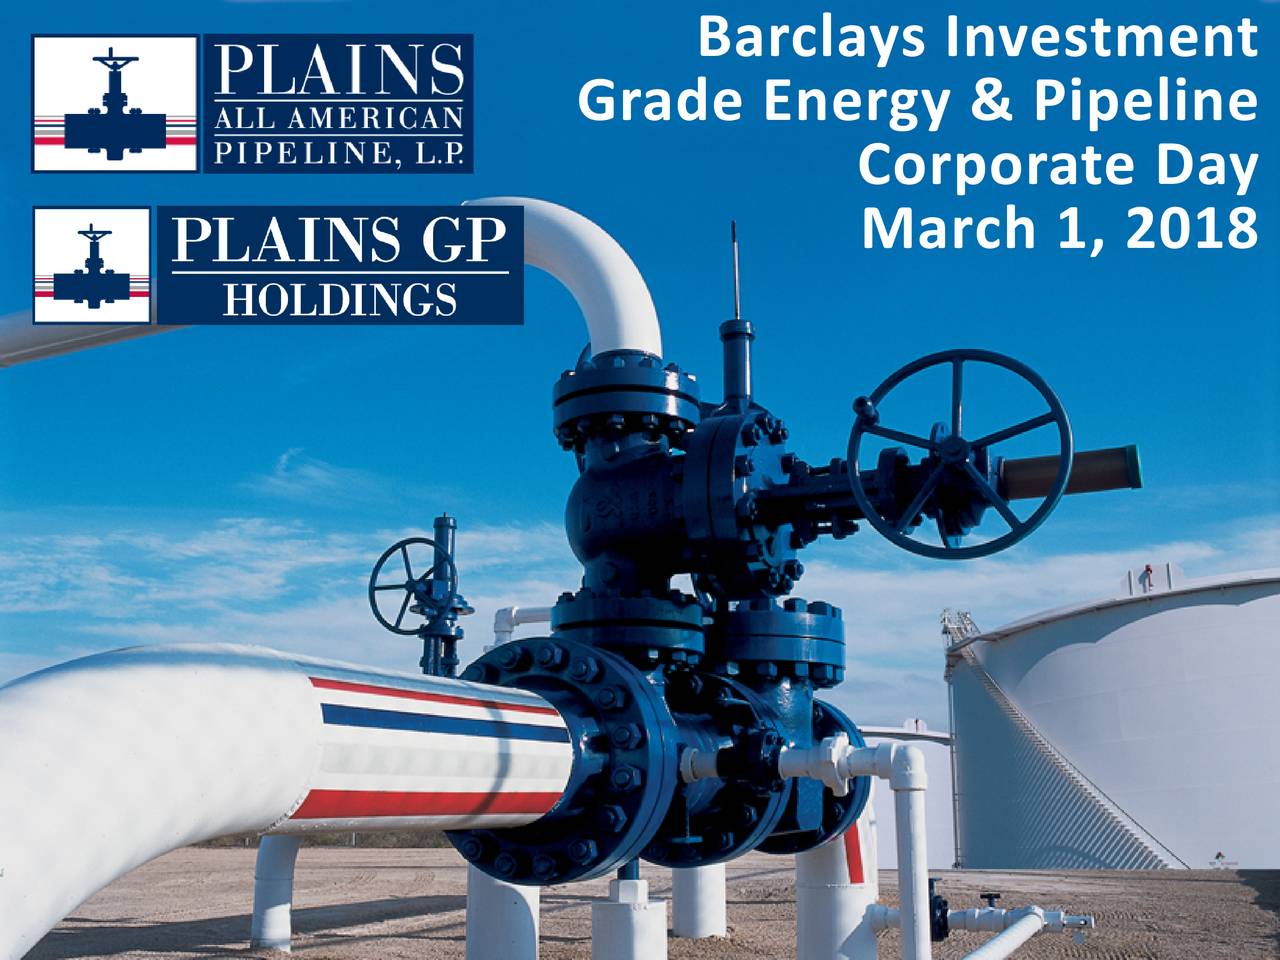 Barclays Investment